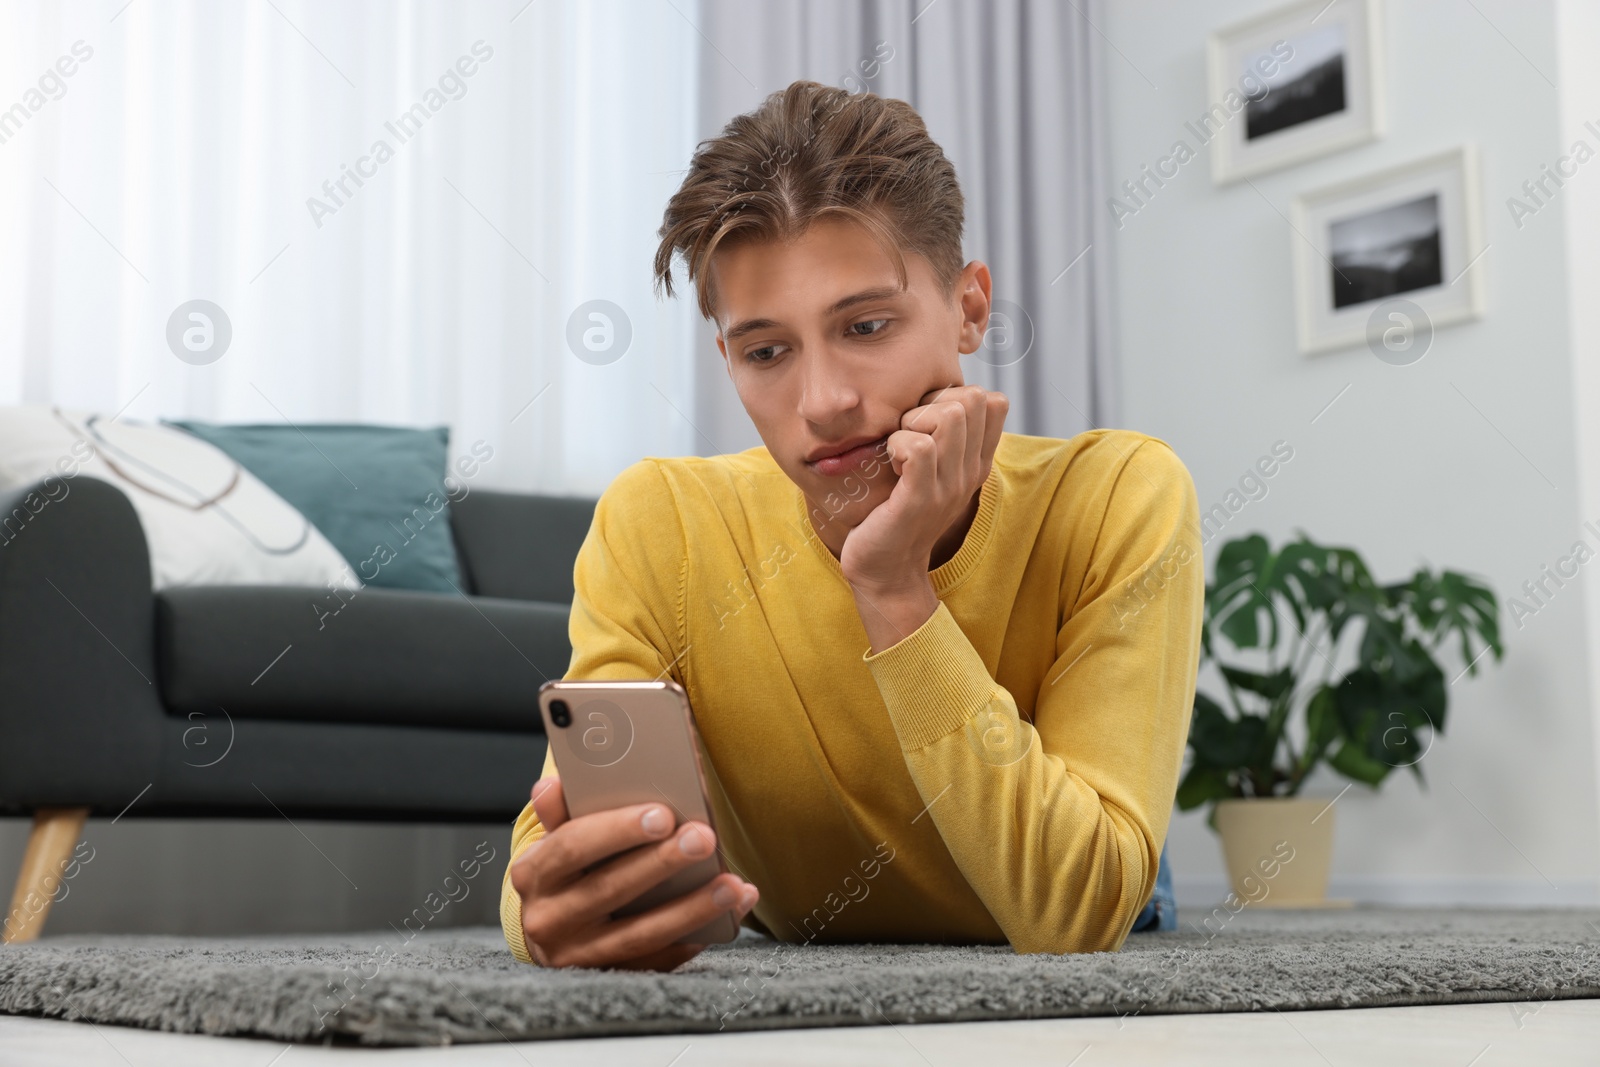 Photo of Young man with smartphone on carpet indoors